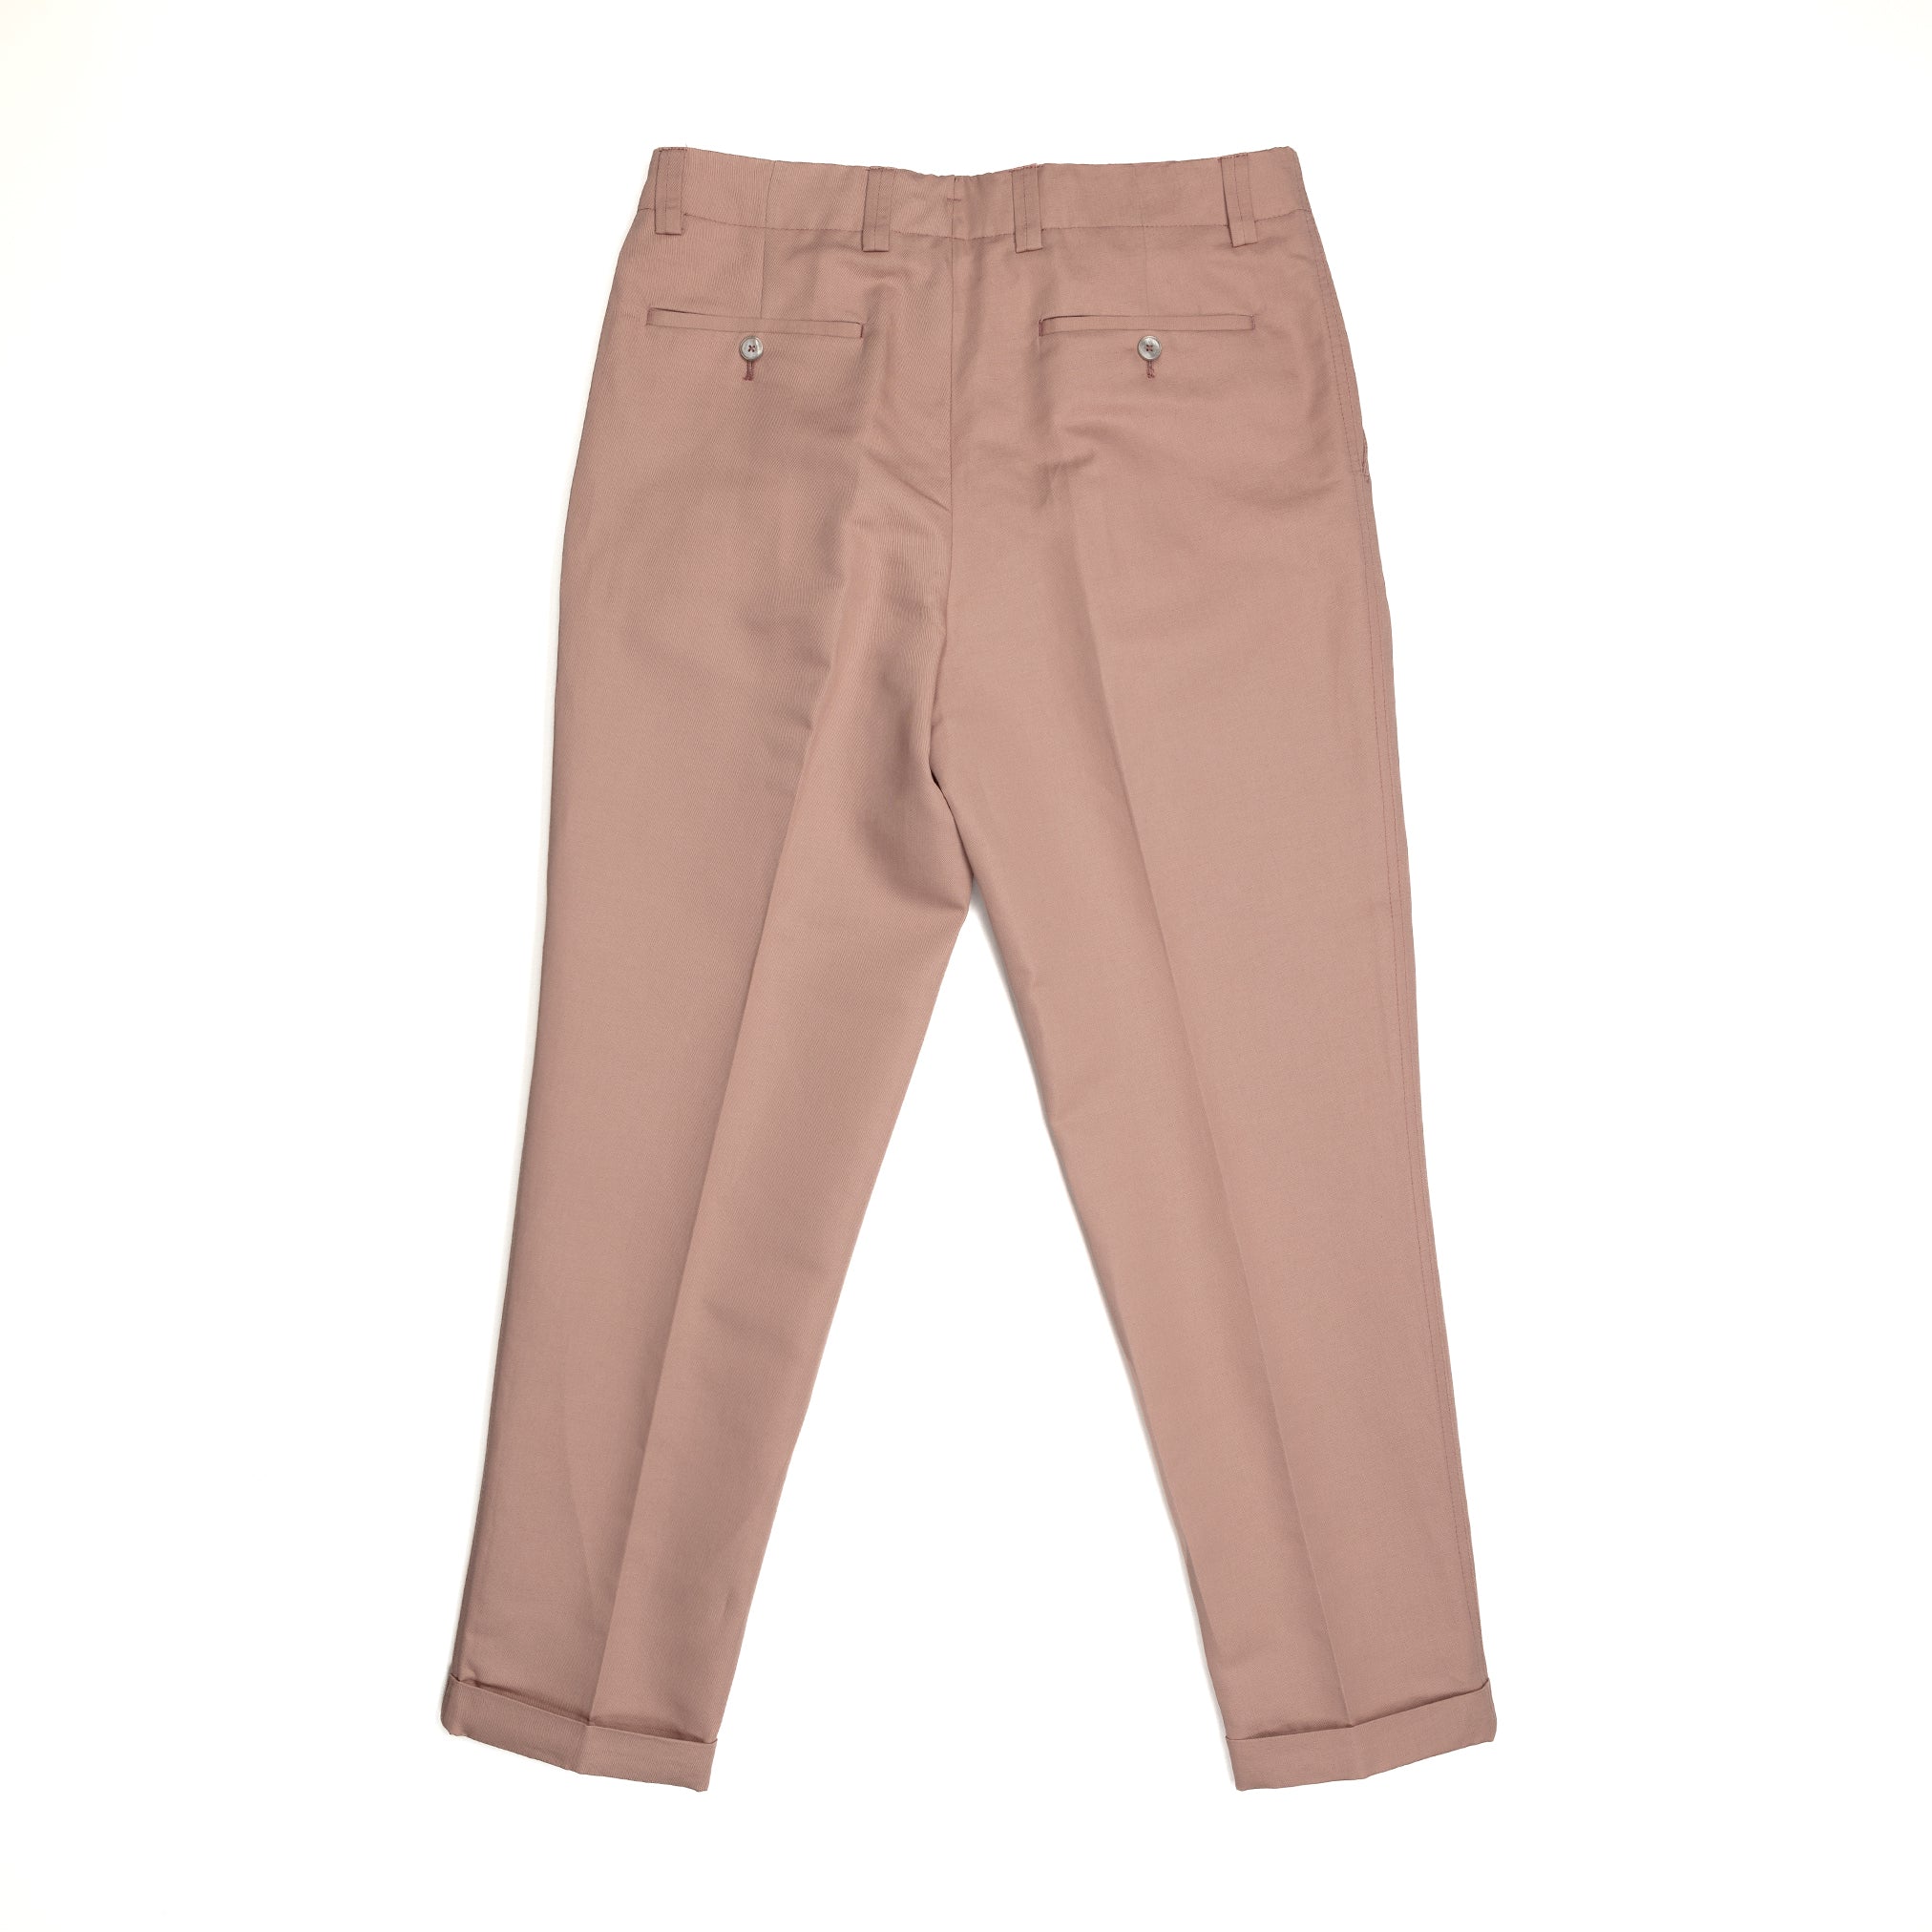 Cardiff Cotton & Linen Pant in Dusty Rose